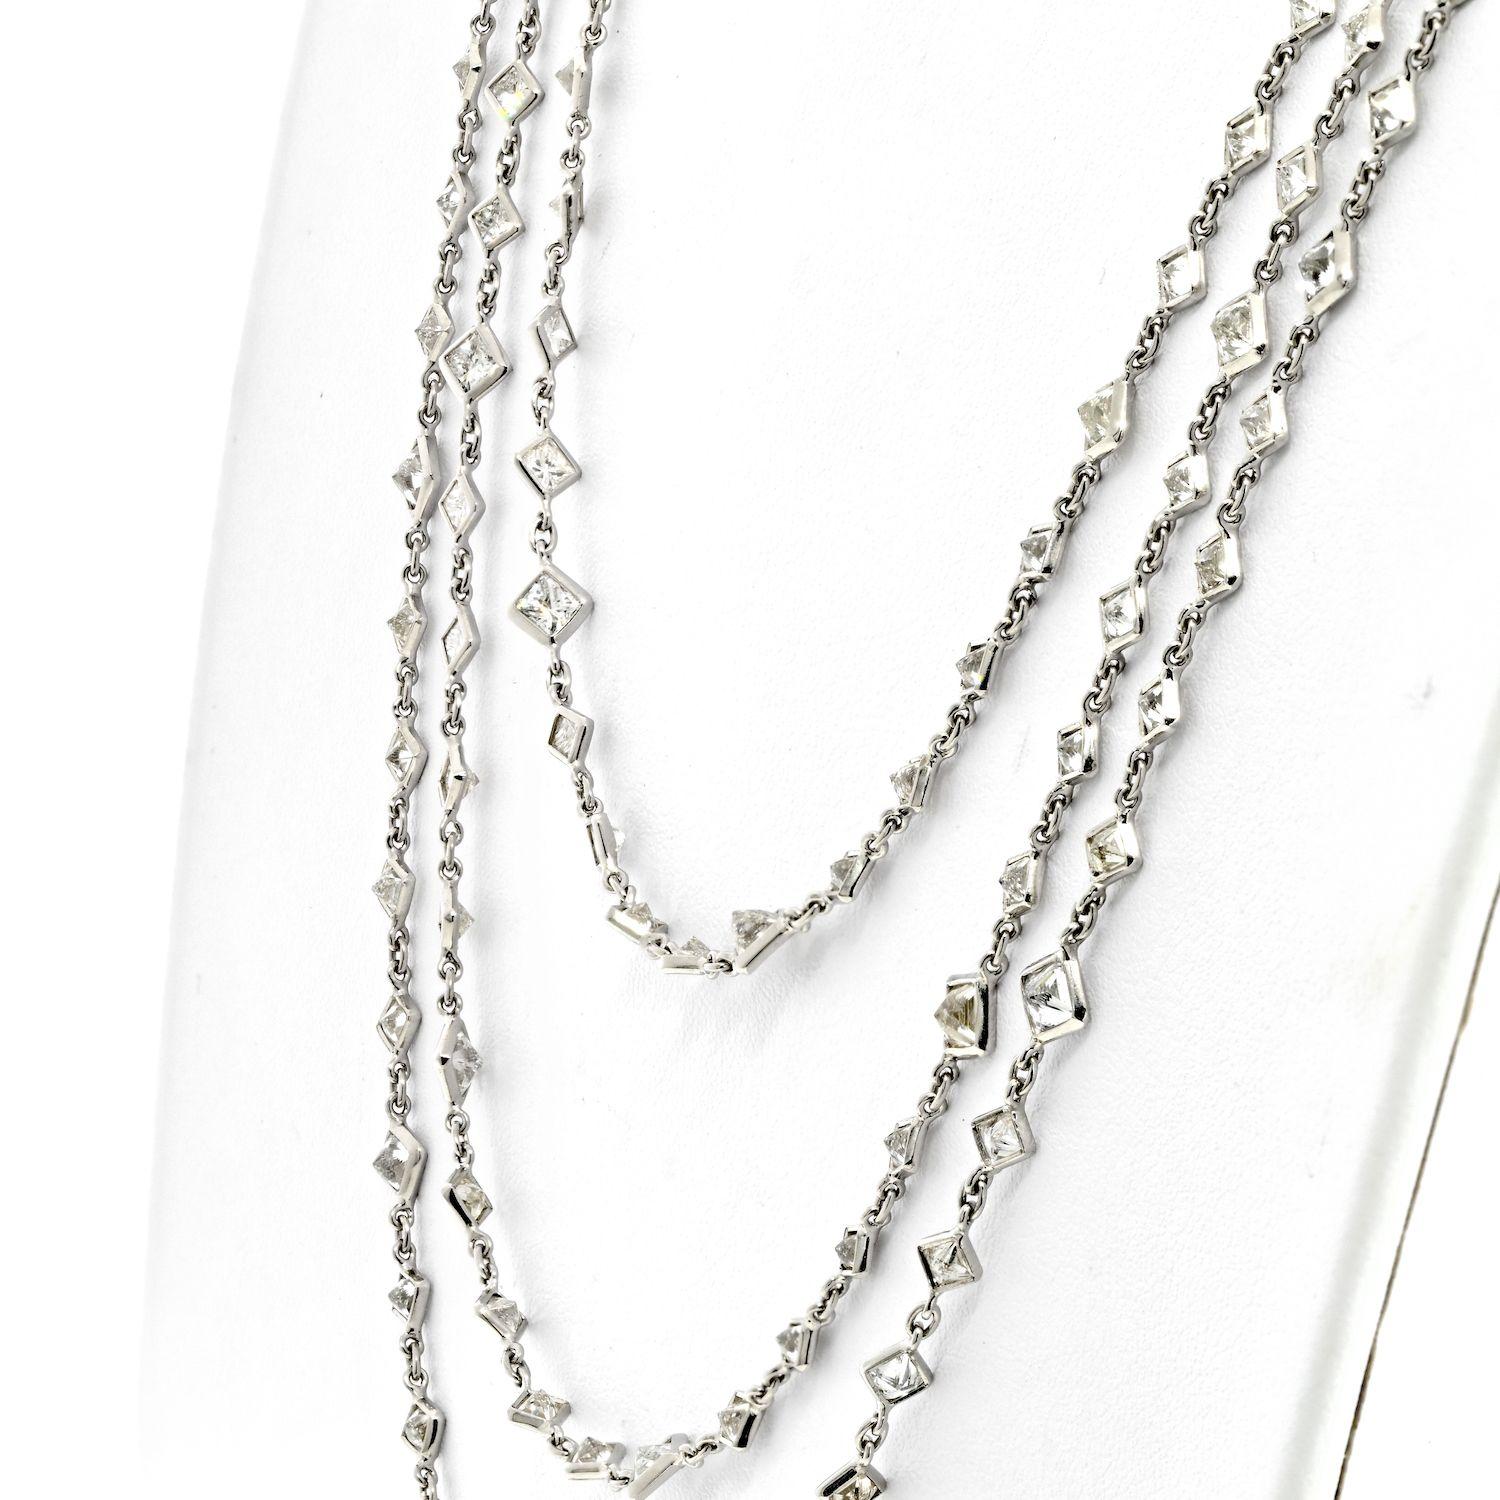 The Diamond by the Yard Chain Necklace in platinum is a luxurious and impressive piece of jewelry. Measuring 76 inches in length, this necklace is adorned with 234 princess cut diamonds, each mounted cleanly and exhibiting a colorless quality that